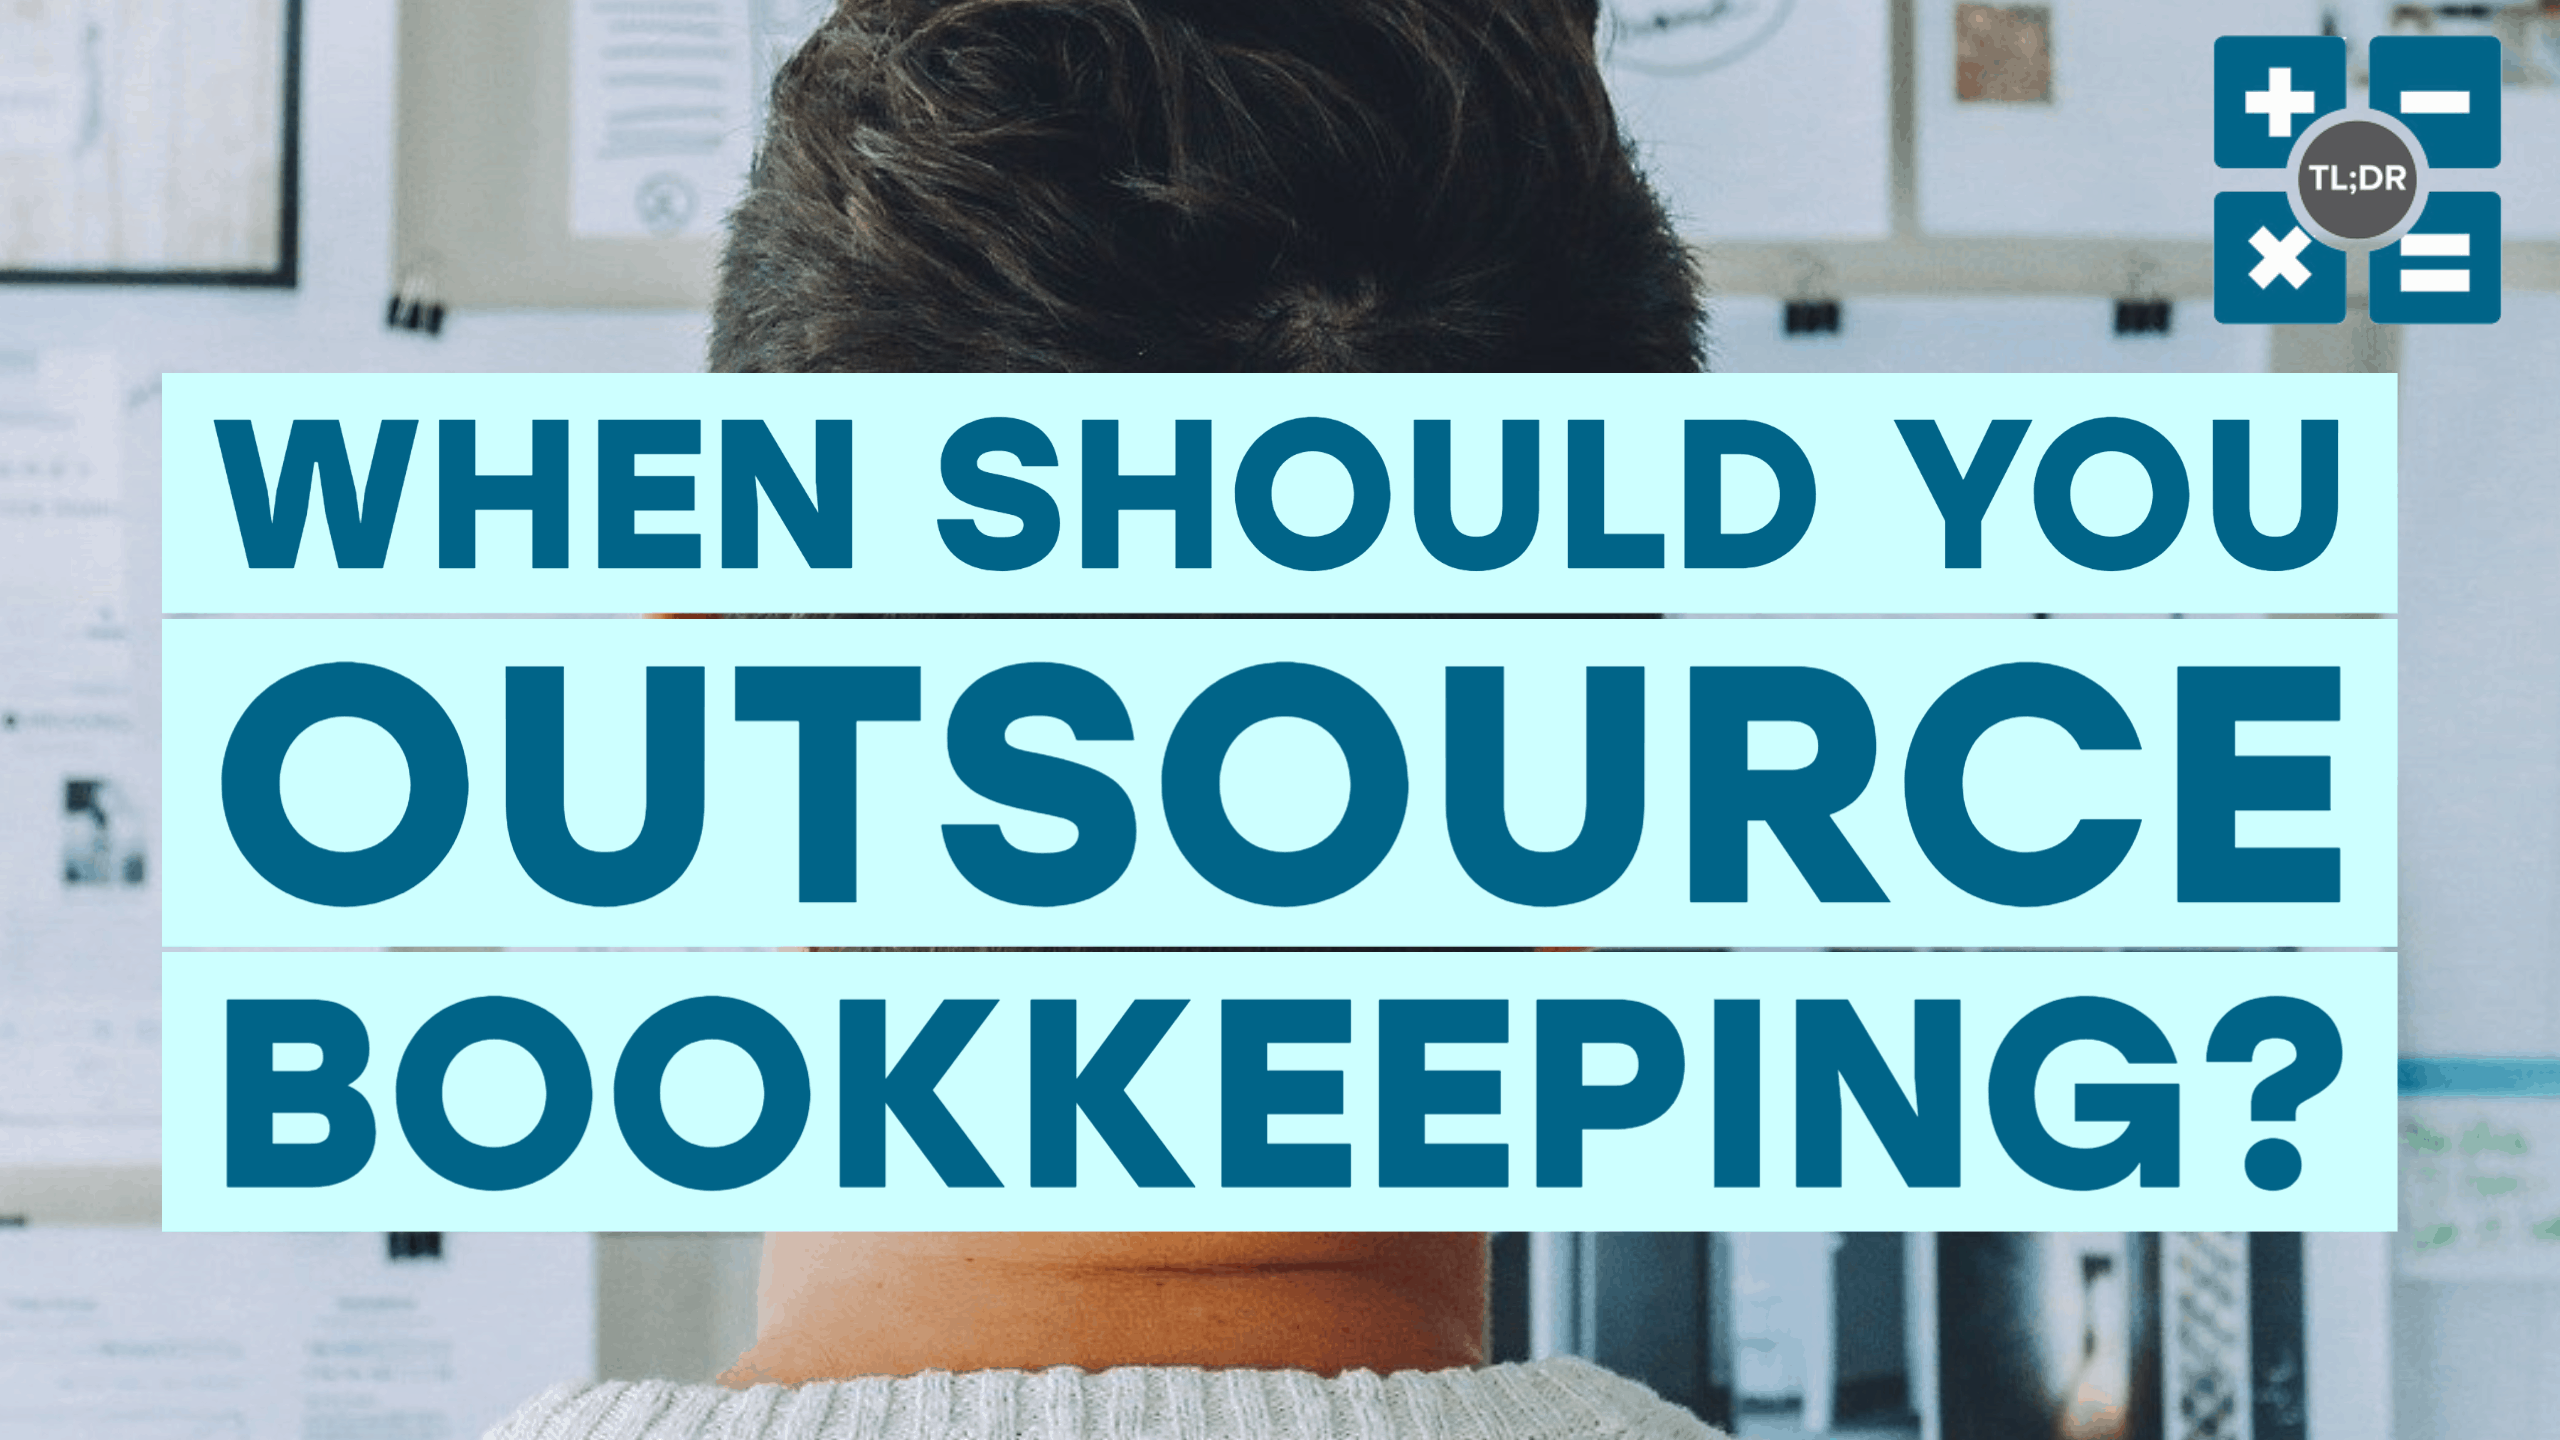 When to outsource bookkeeping (2)